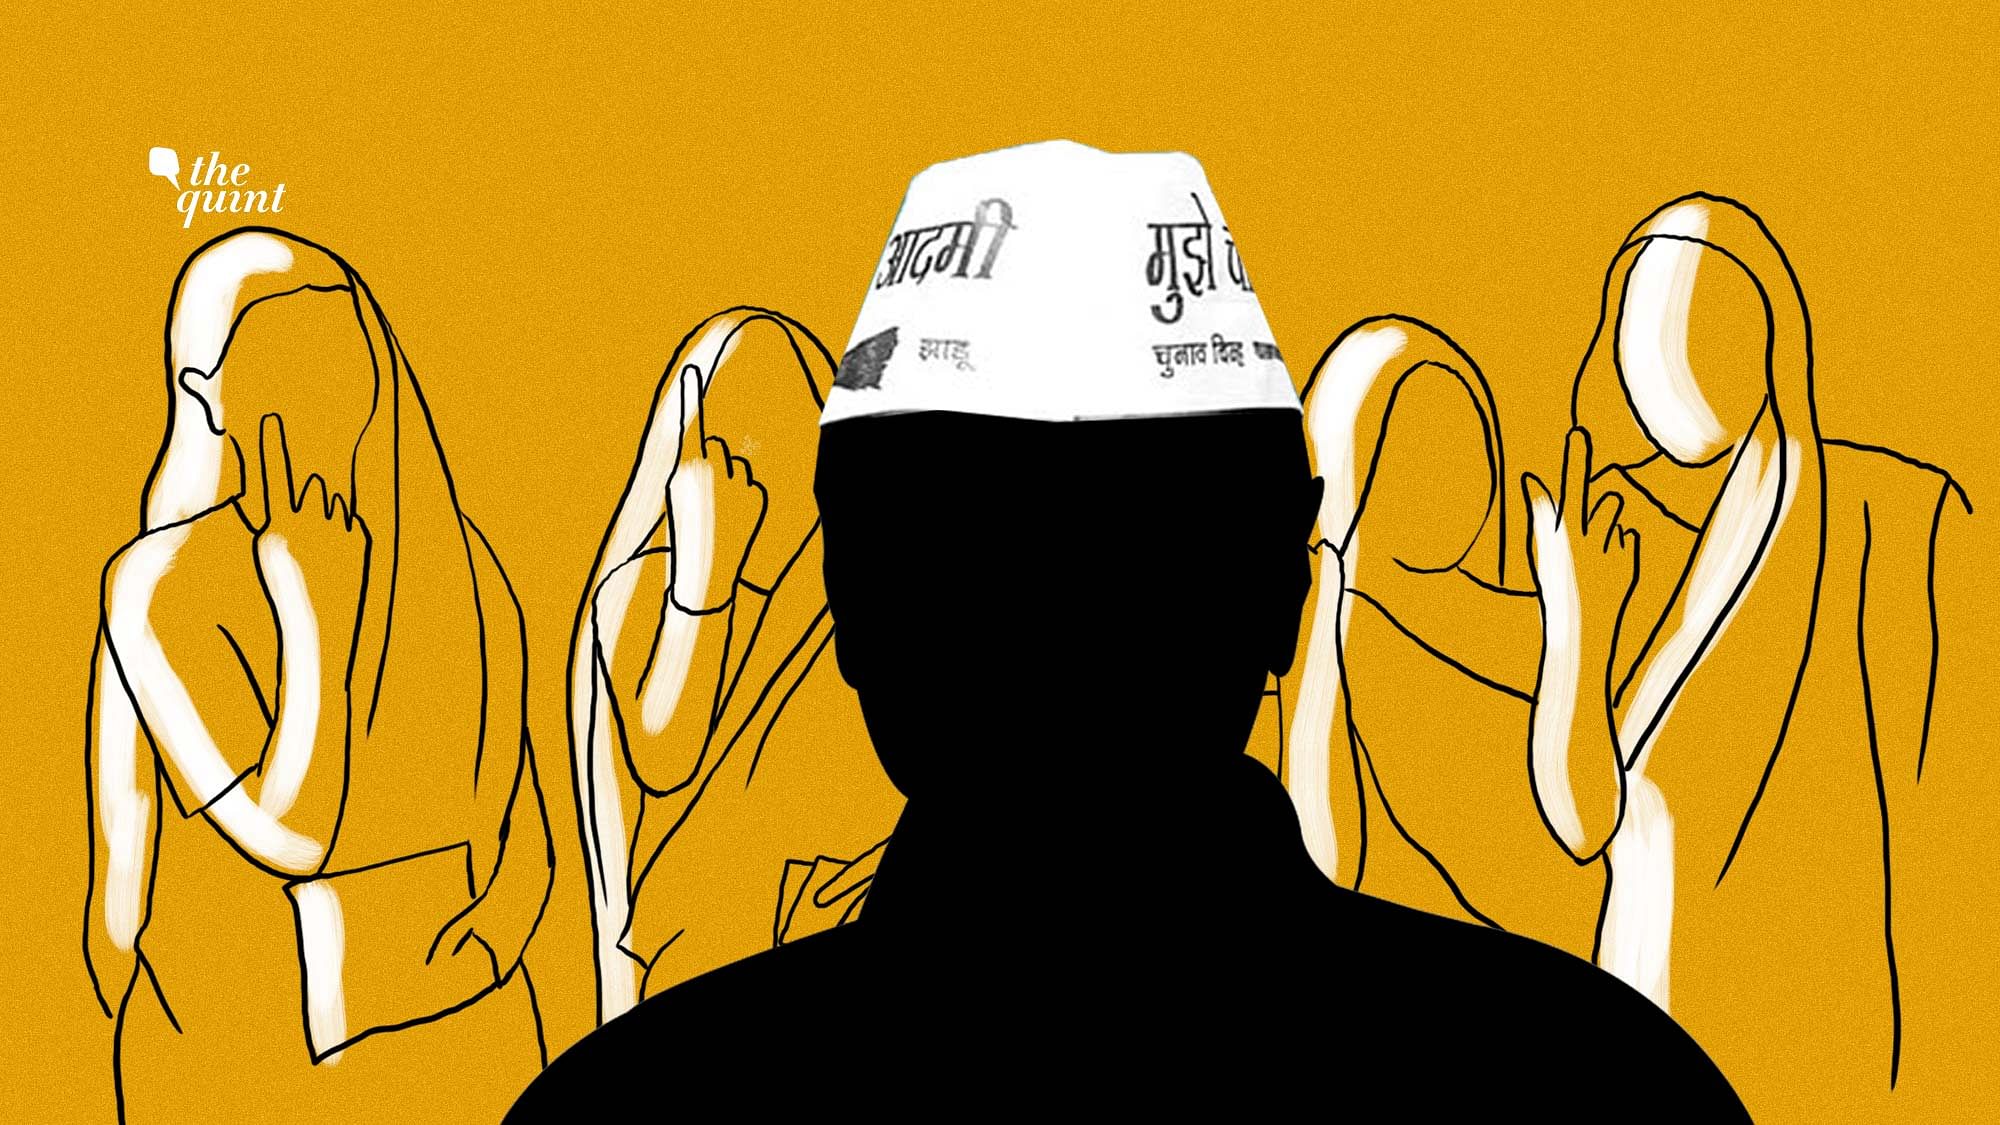 AAP’s victory has largely been credited to their development-centric campaign and focus on issues like education, subsidised electricity and water, and provision of free public transport for women.